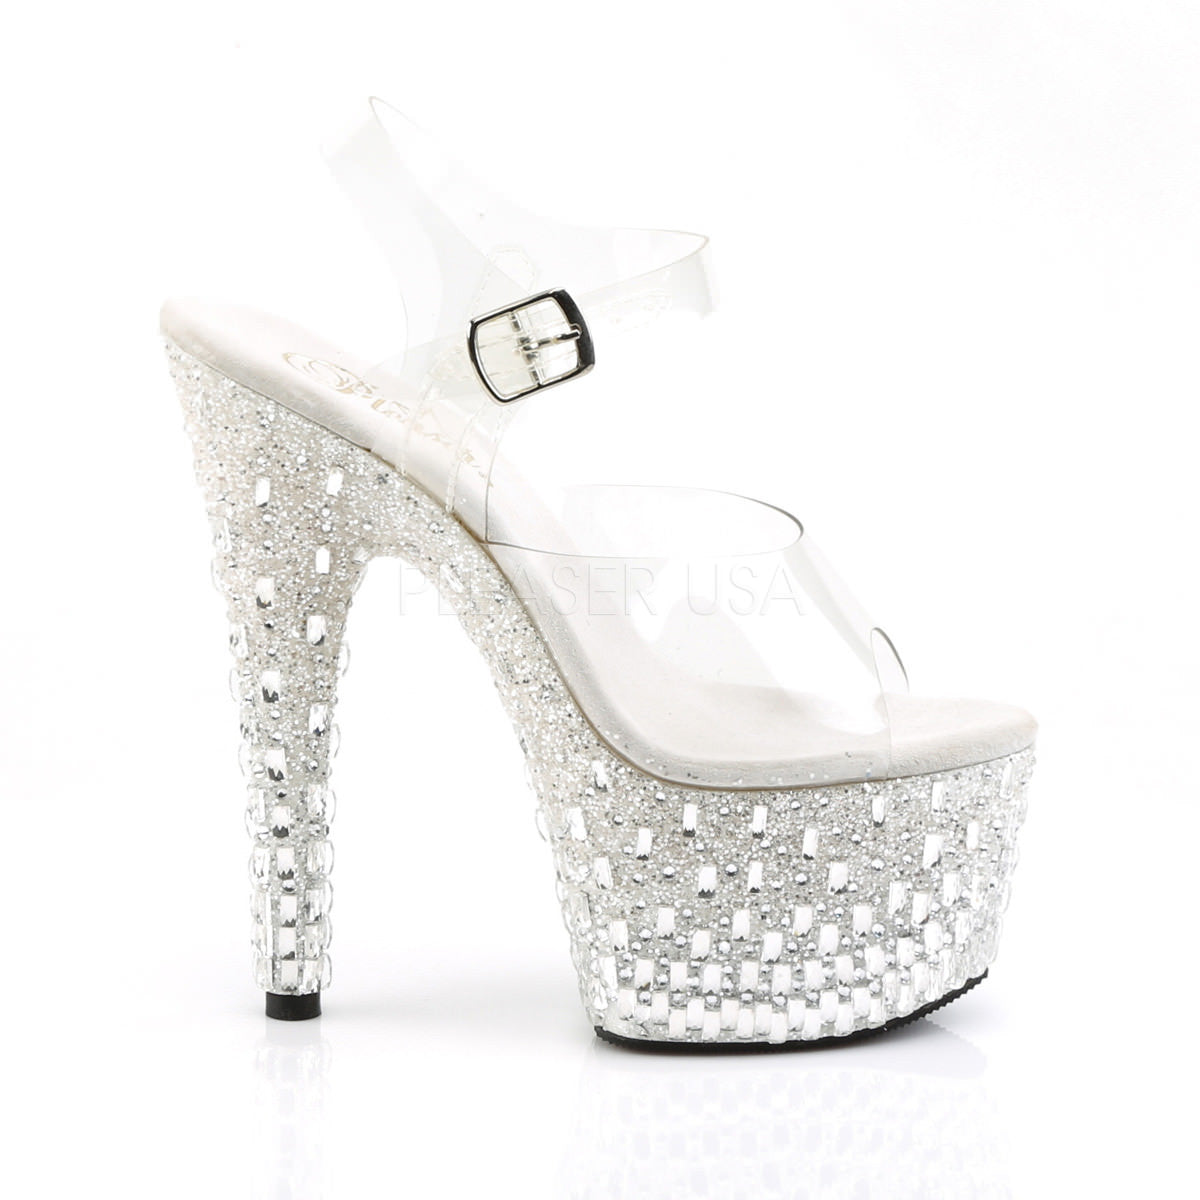 7 Inch Heel ADORE-708MR-5 Clear